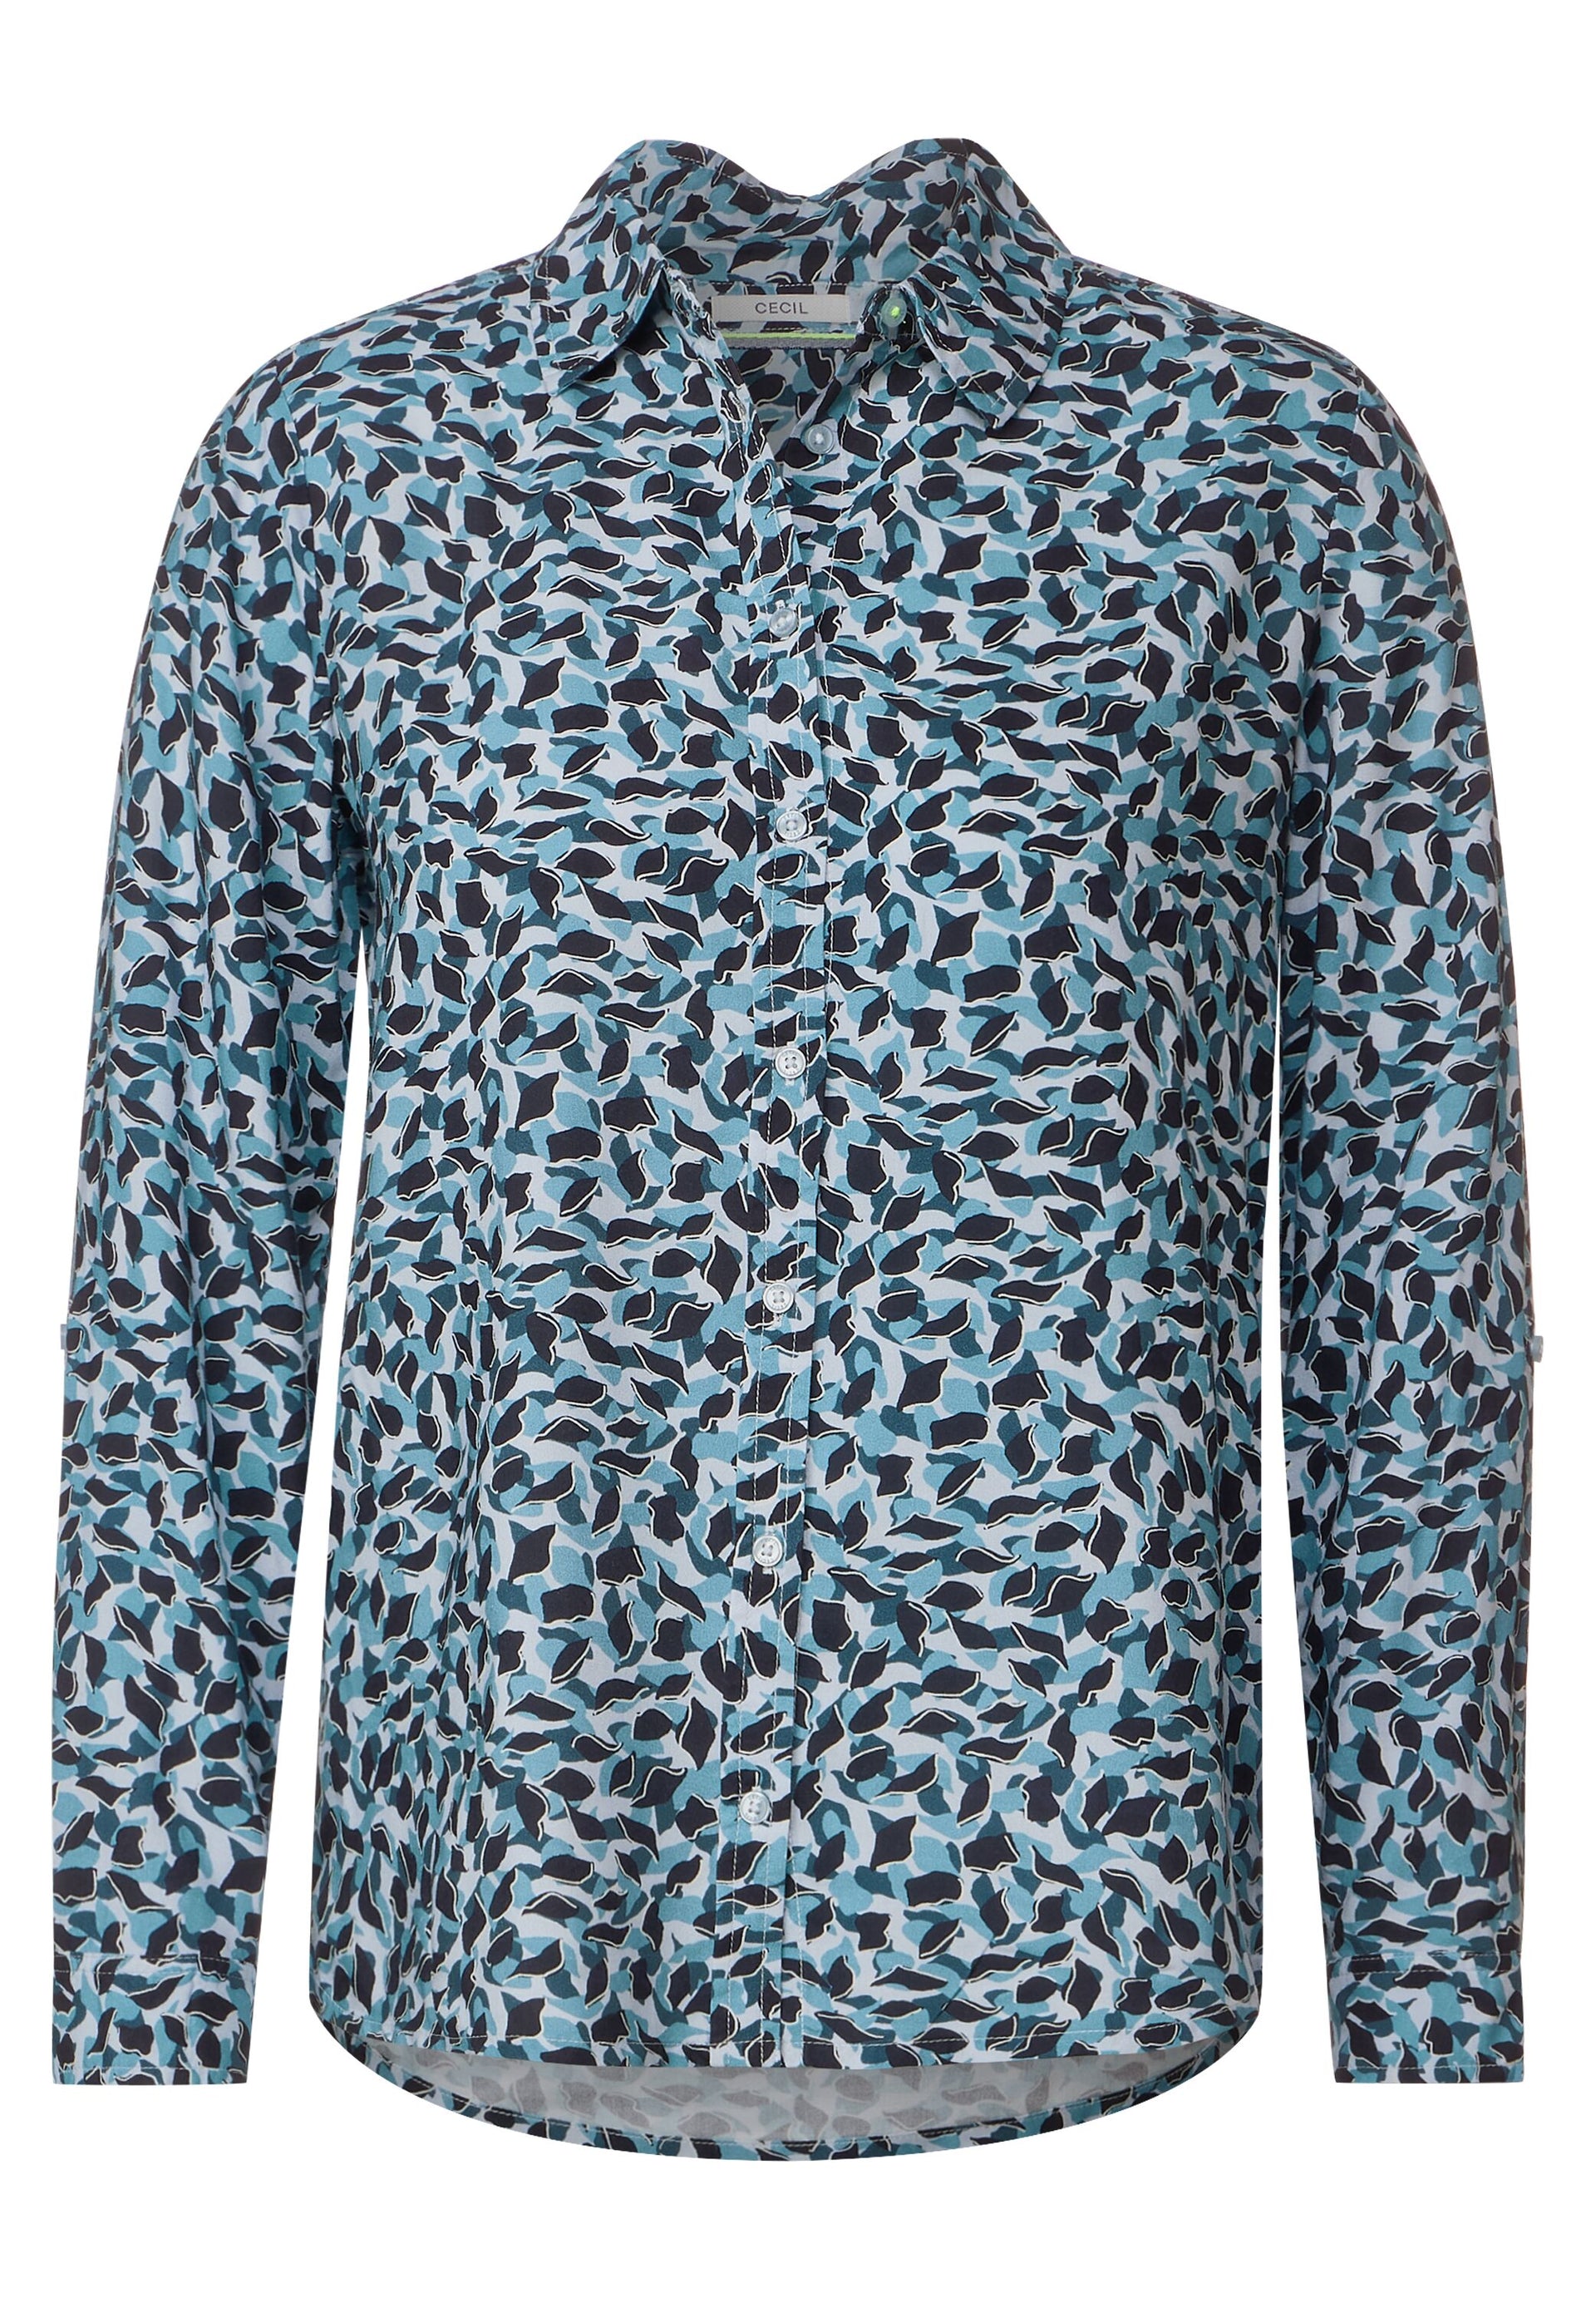 Farbe: strong – mit blue - Bluse grafischem Mode petrol Print TWISTY - CECIL